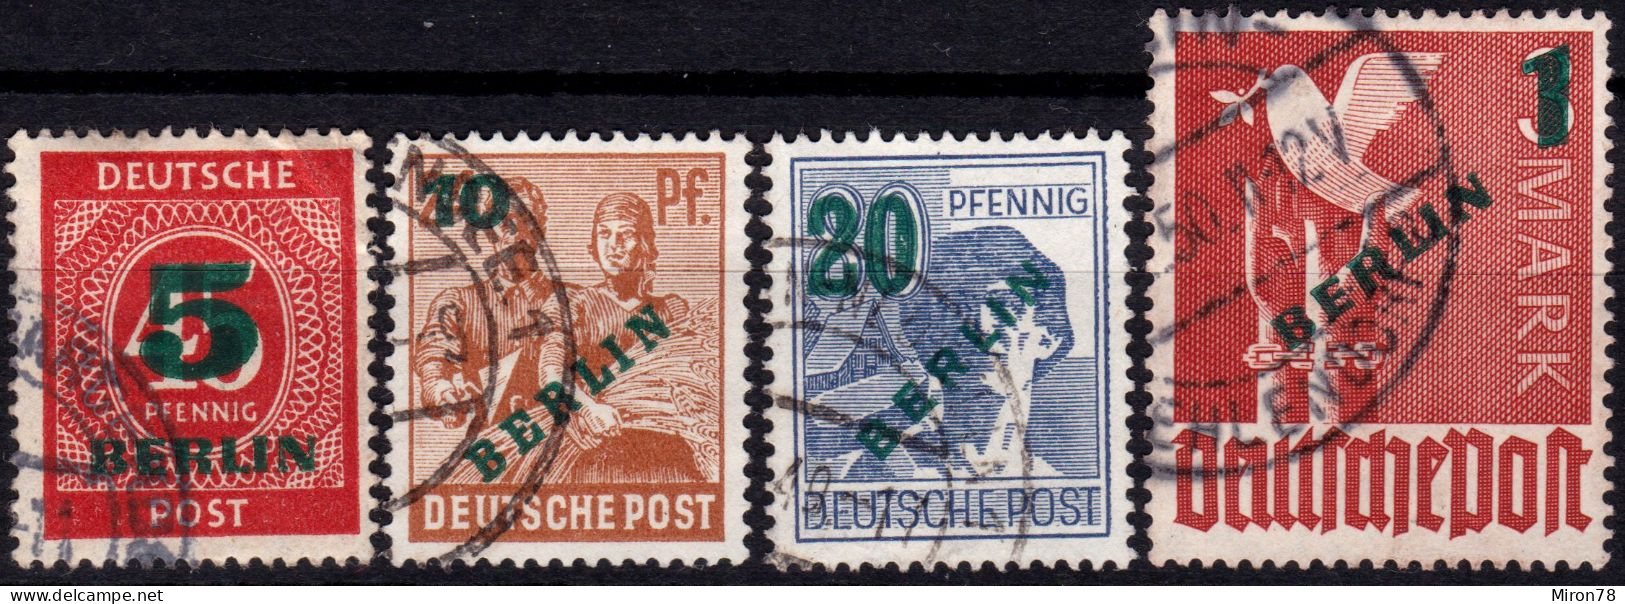 Berlin 1949, Allied Occupation, Community Editions, Mi 64 - 67 Used Lot14 - Usados